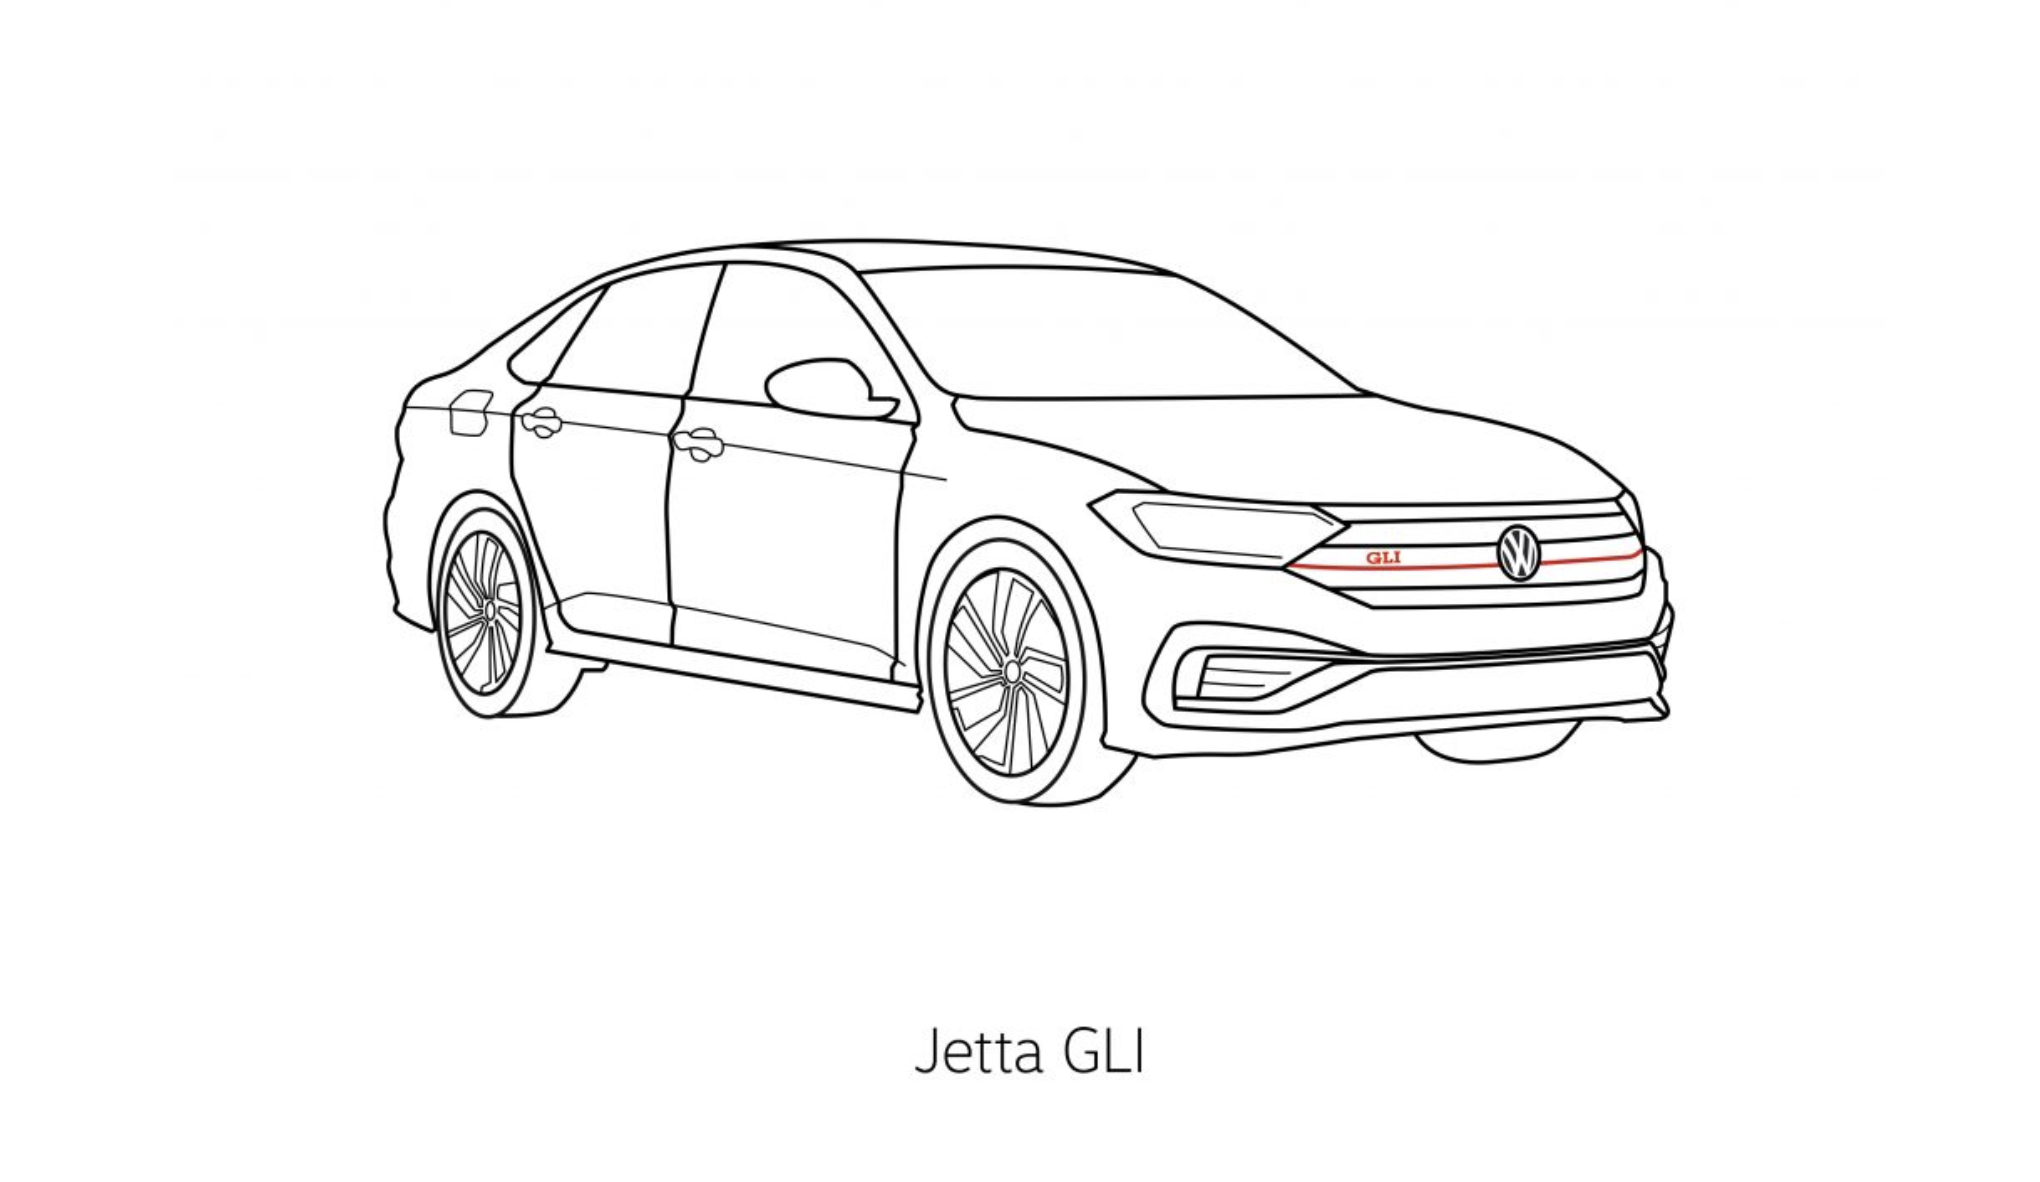 Vw coloring pages coloring books helping kids color